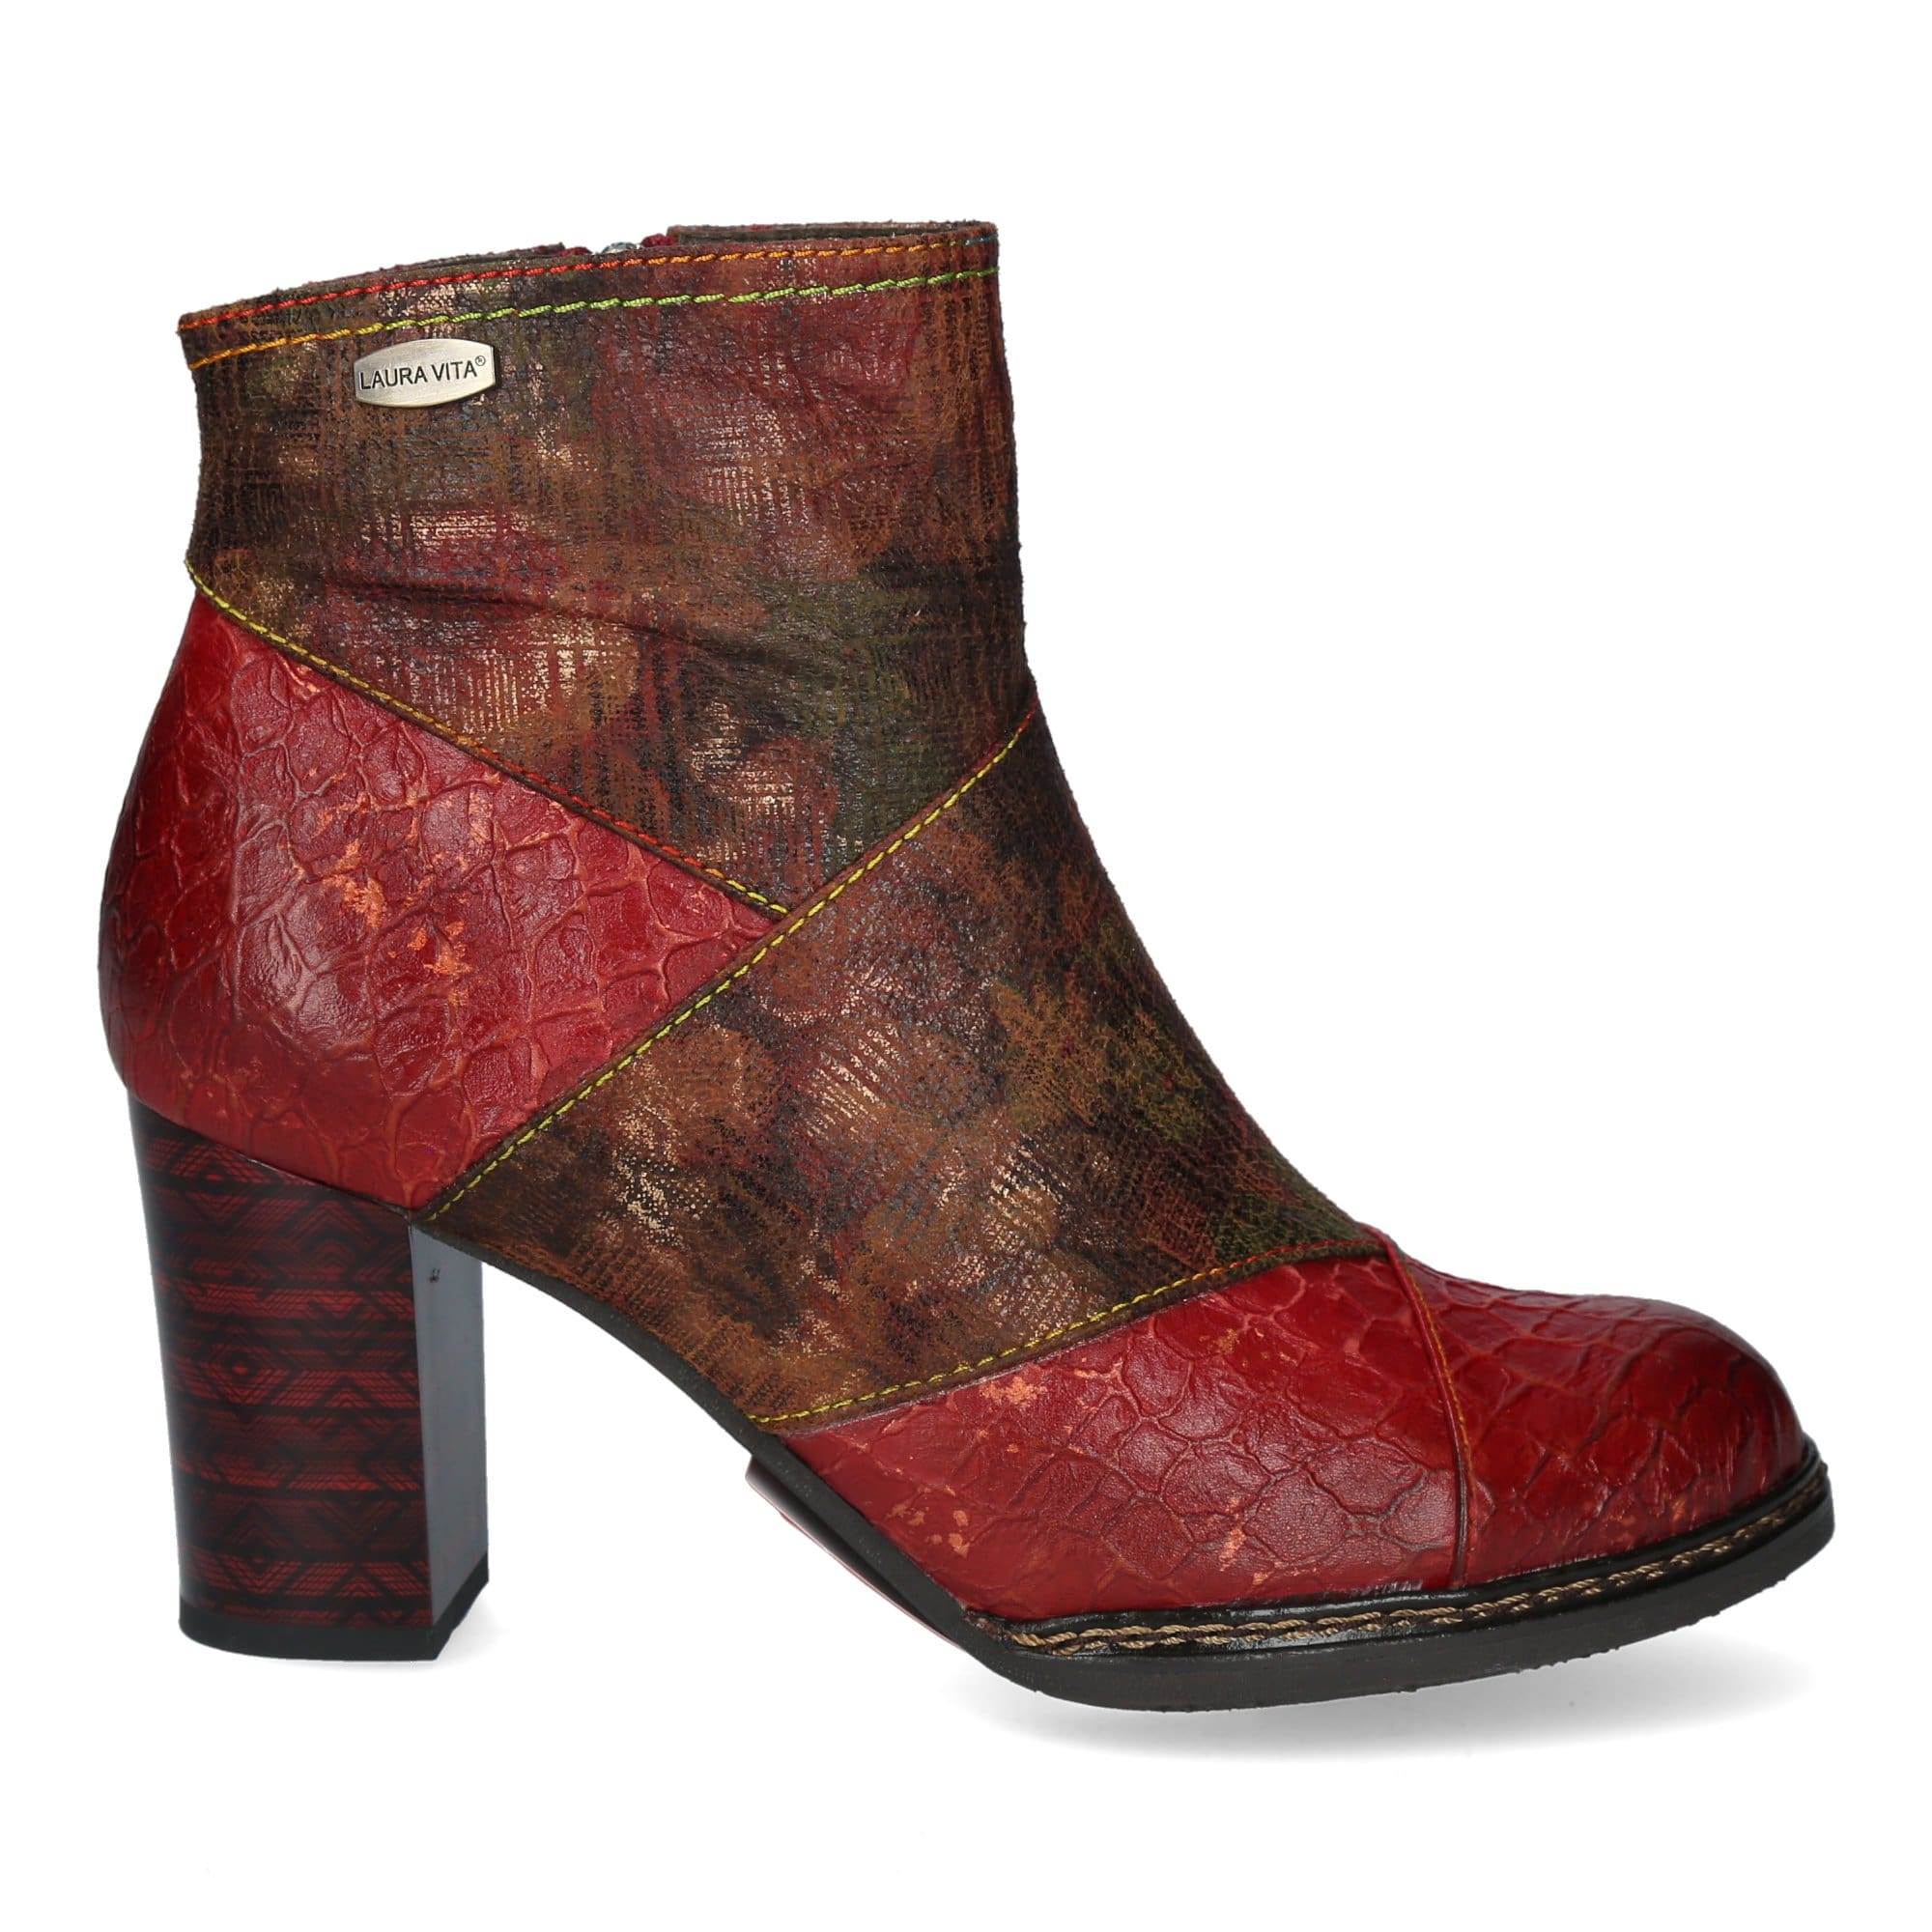 Chaussure ELCEAO 01 - 35 / Rouge - Boots